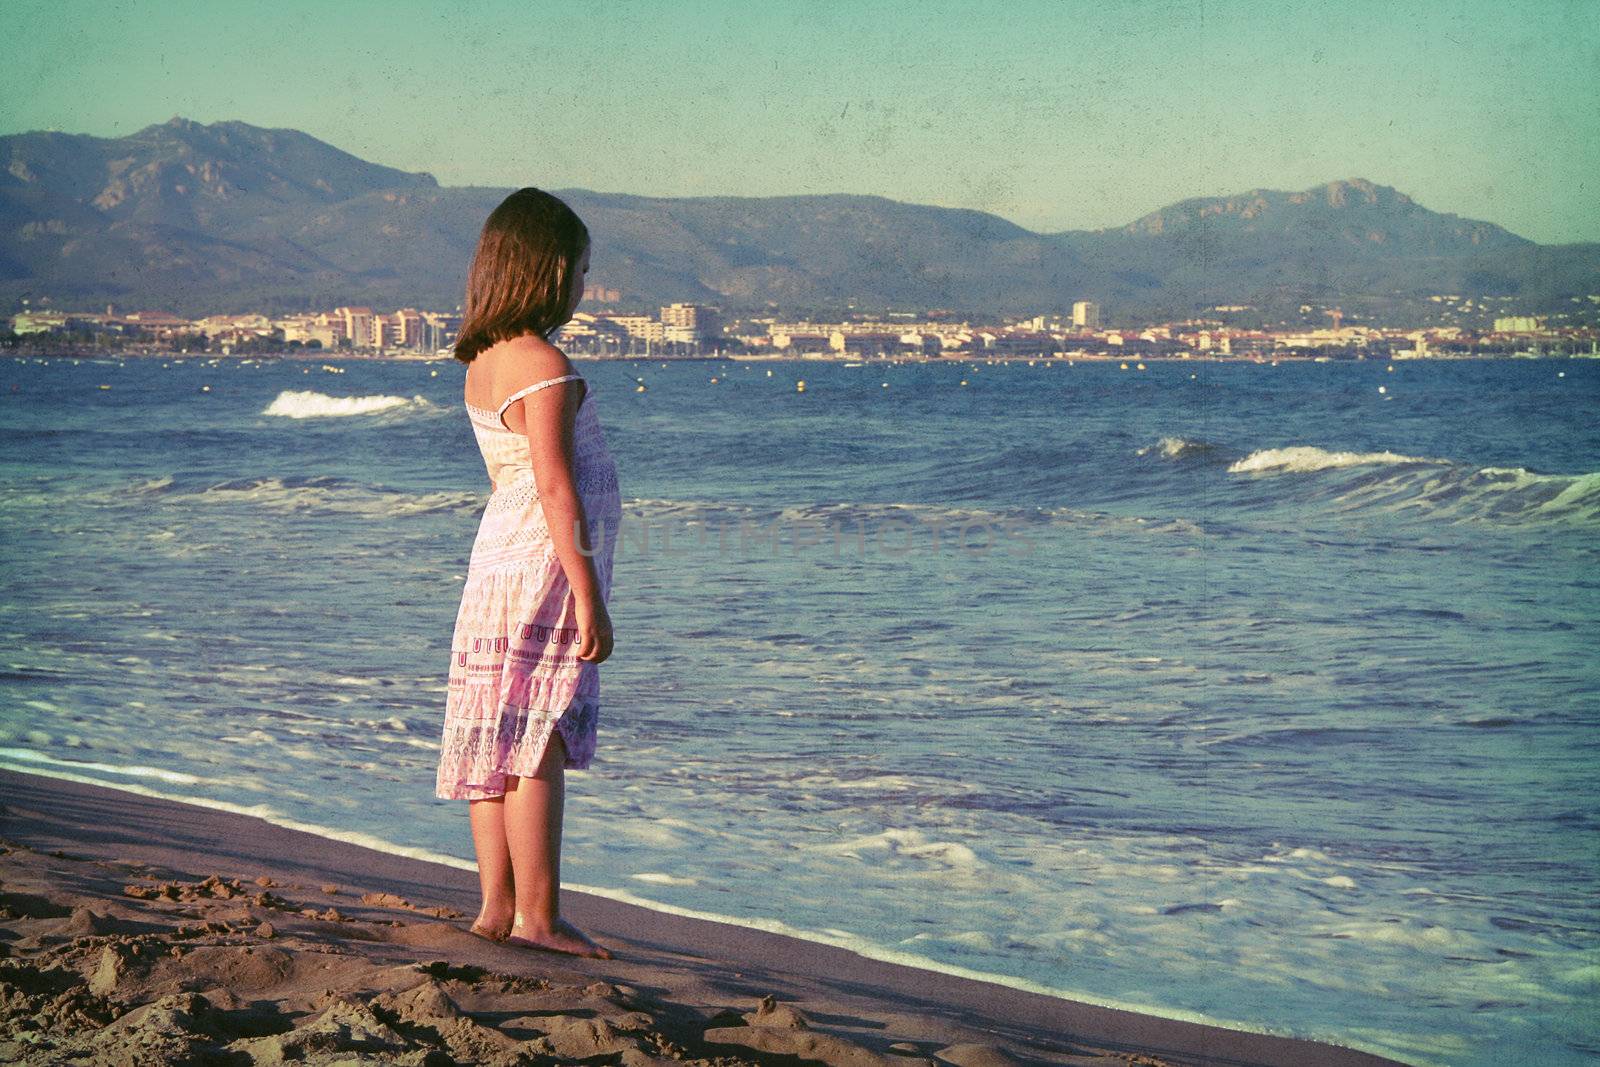 the little girl standing on the beach